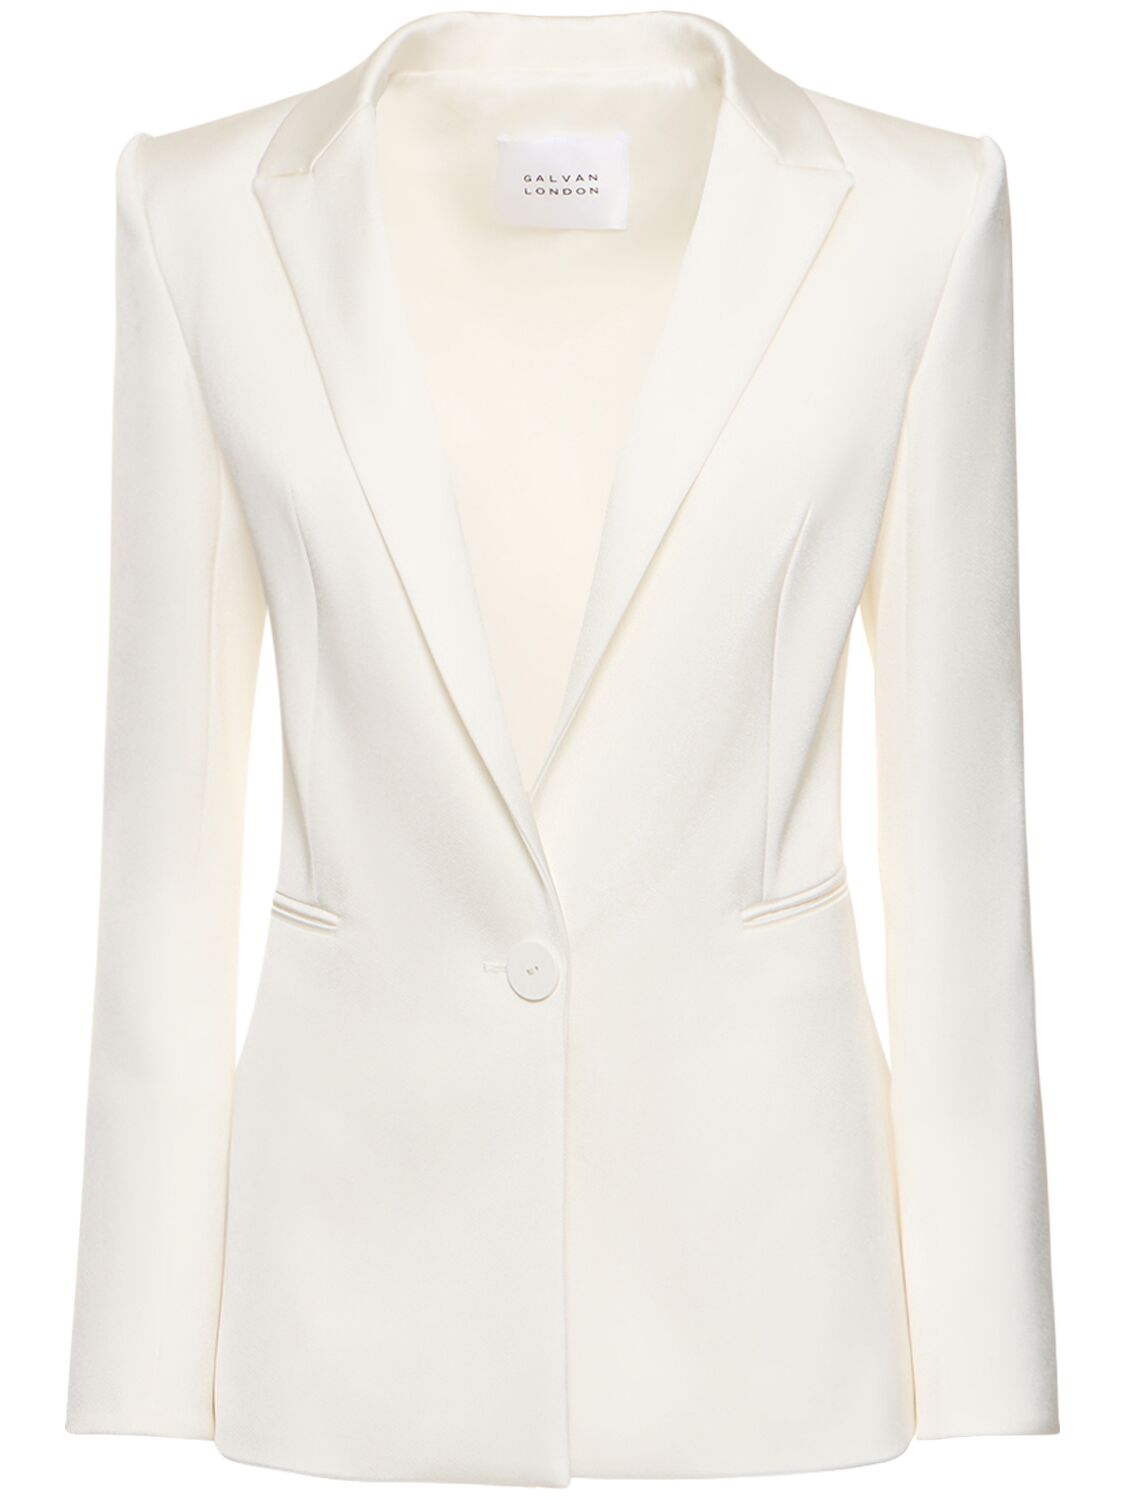 Image of Satin Sculpted Single Breasted Blazer